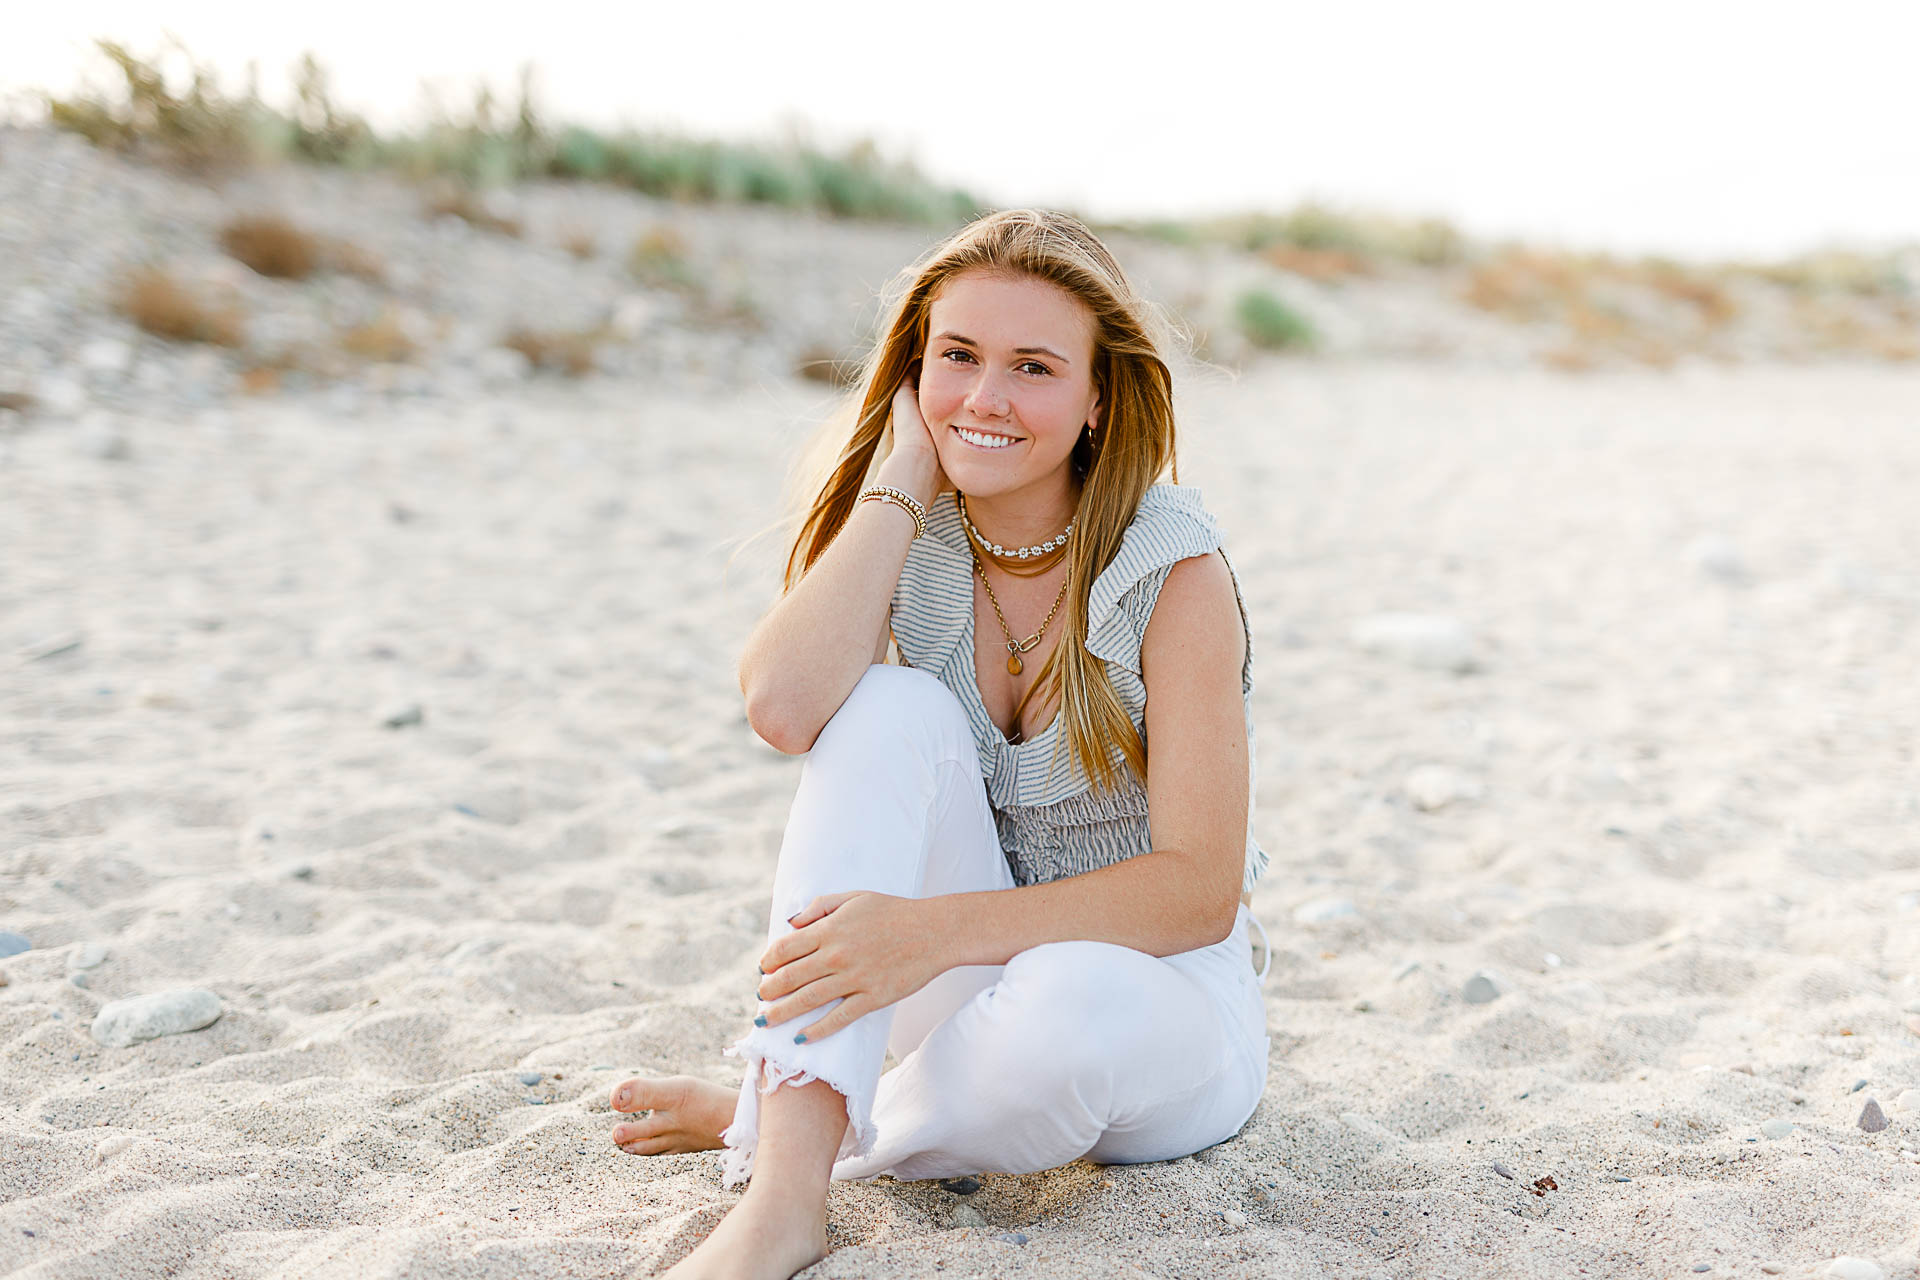 Photo by Scituate Senior Portrait Photographer Christina Runnals | High school senior girl sitting in the sand with dunes in the background